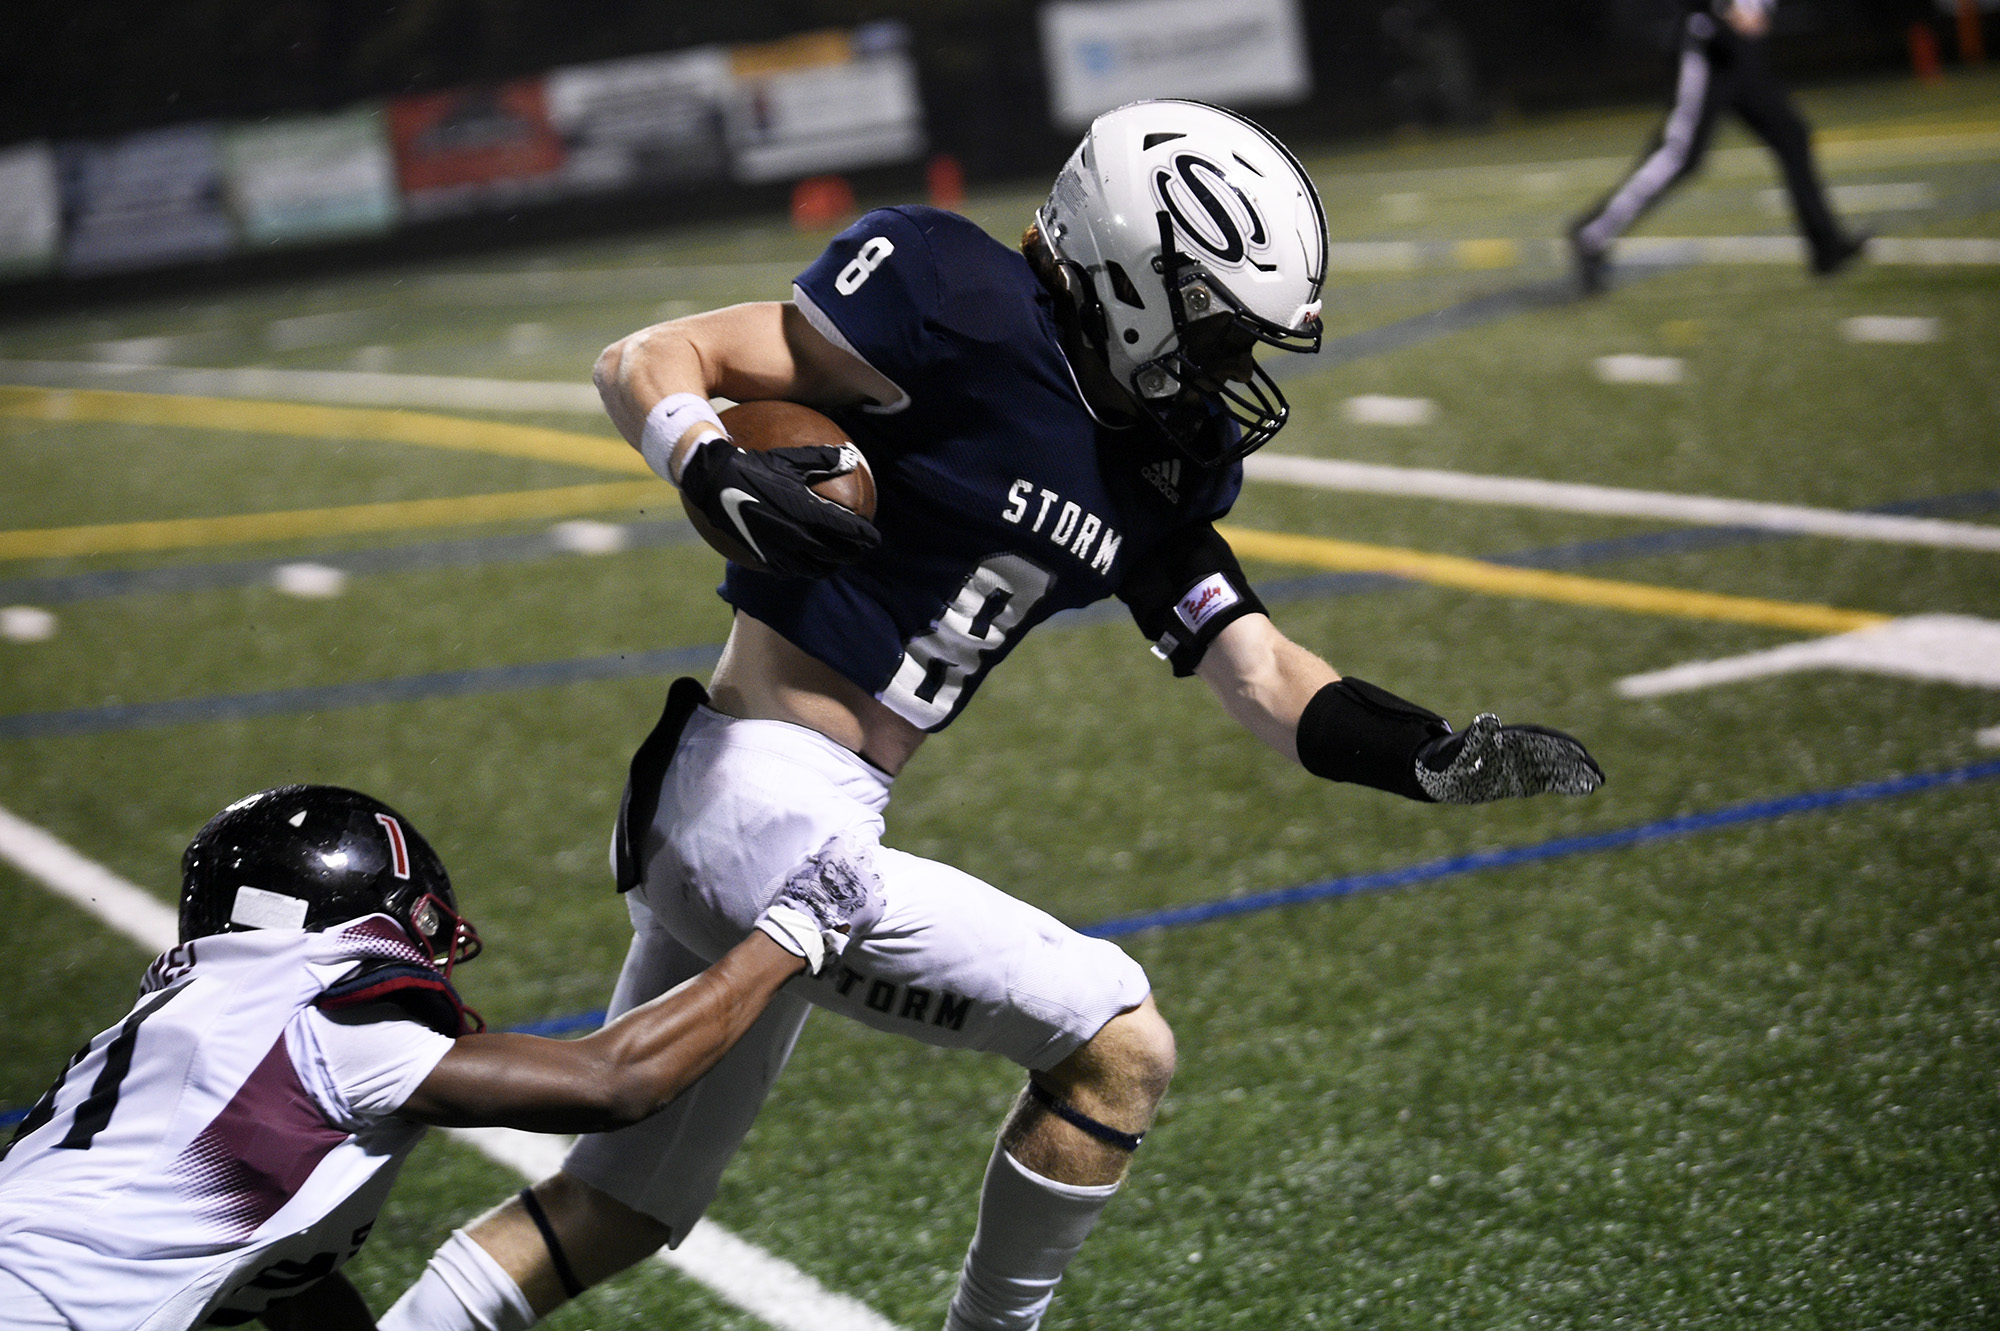 Skyview’s Gavin Packer (8) slips through the tackle of Bethel’s Jordan Williams (left) on his way to scoring a 36-yard touchdown pass play in the Storm’s 49-21 win over Bethel at Kiggins Bowl on Friday, Nov. 3, 2023.